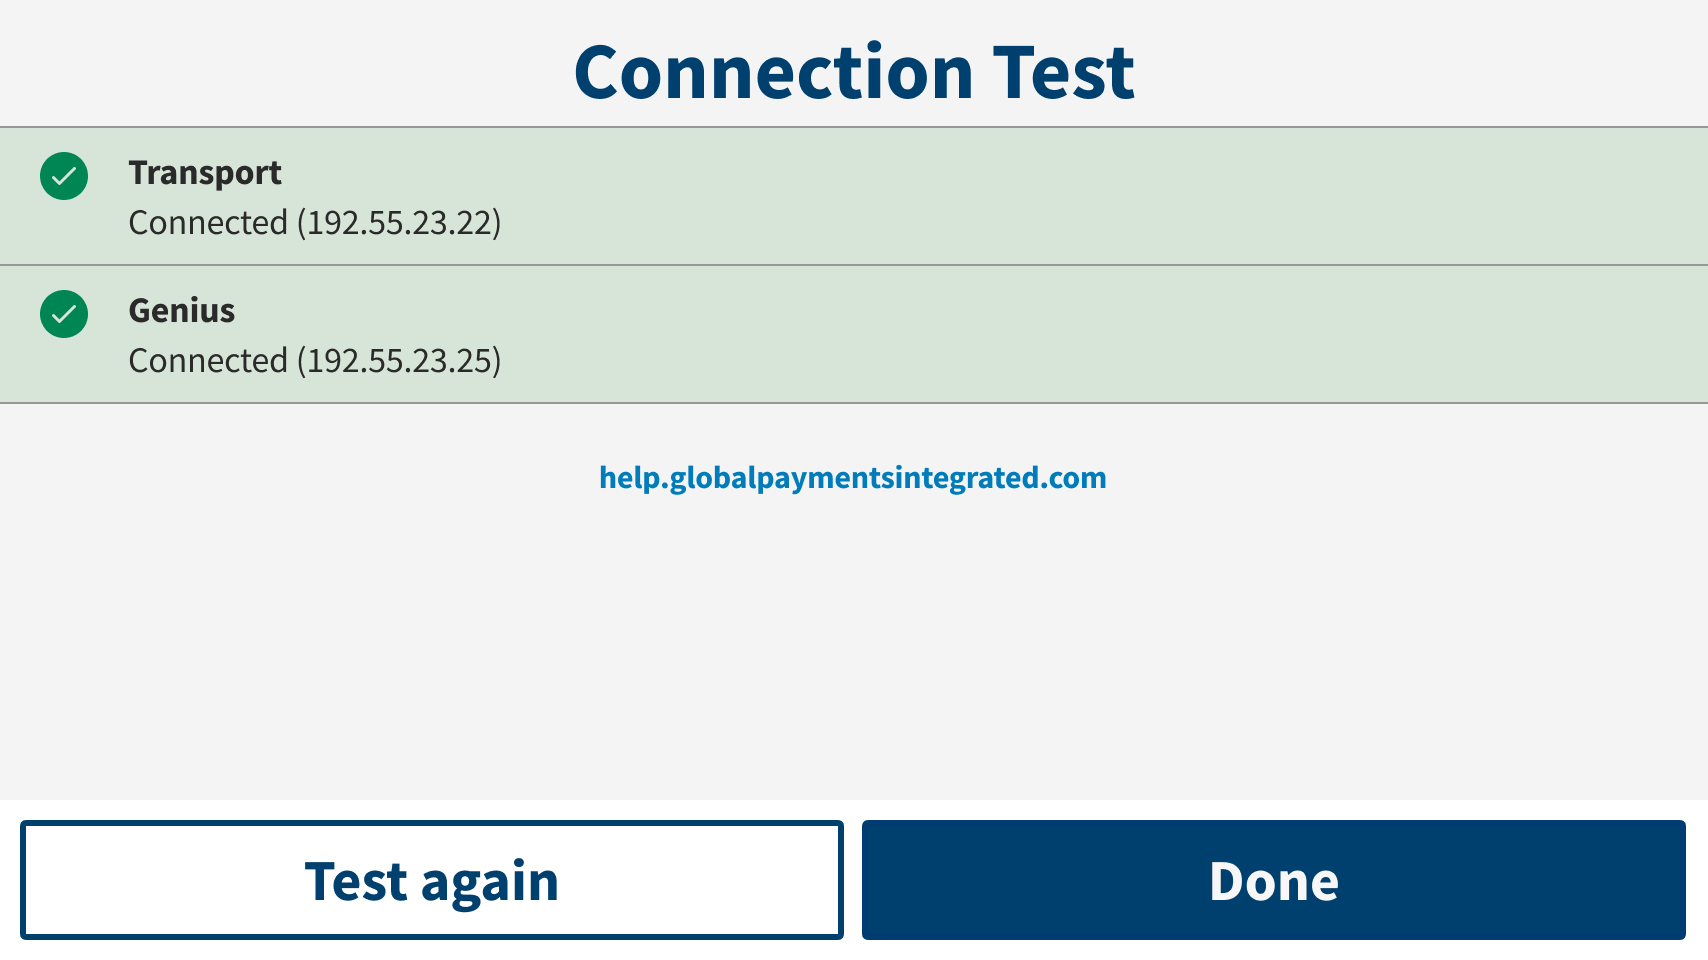 The Gateway Connection Test screen, which shows all tests as Passed.